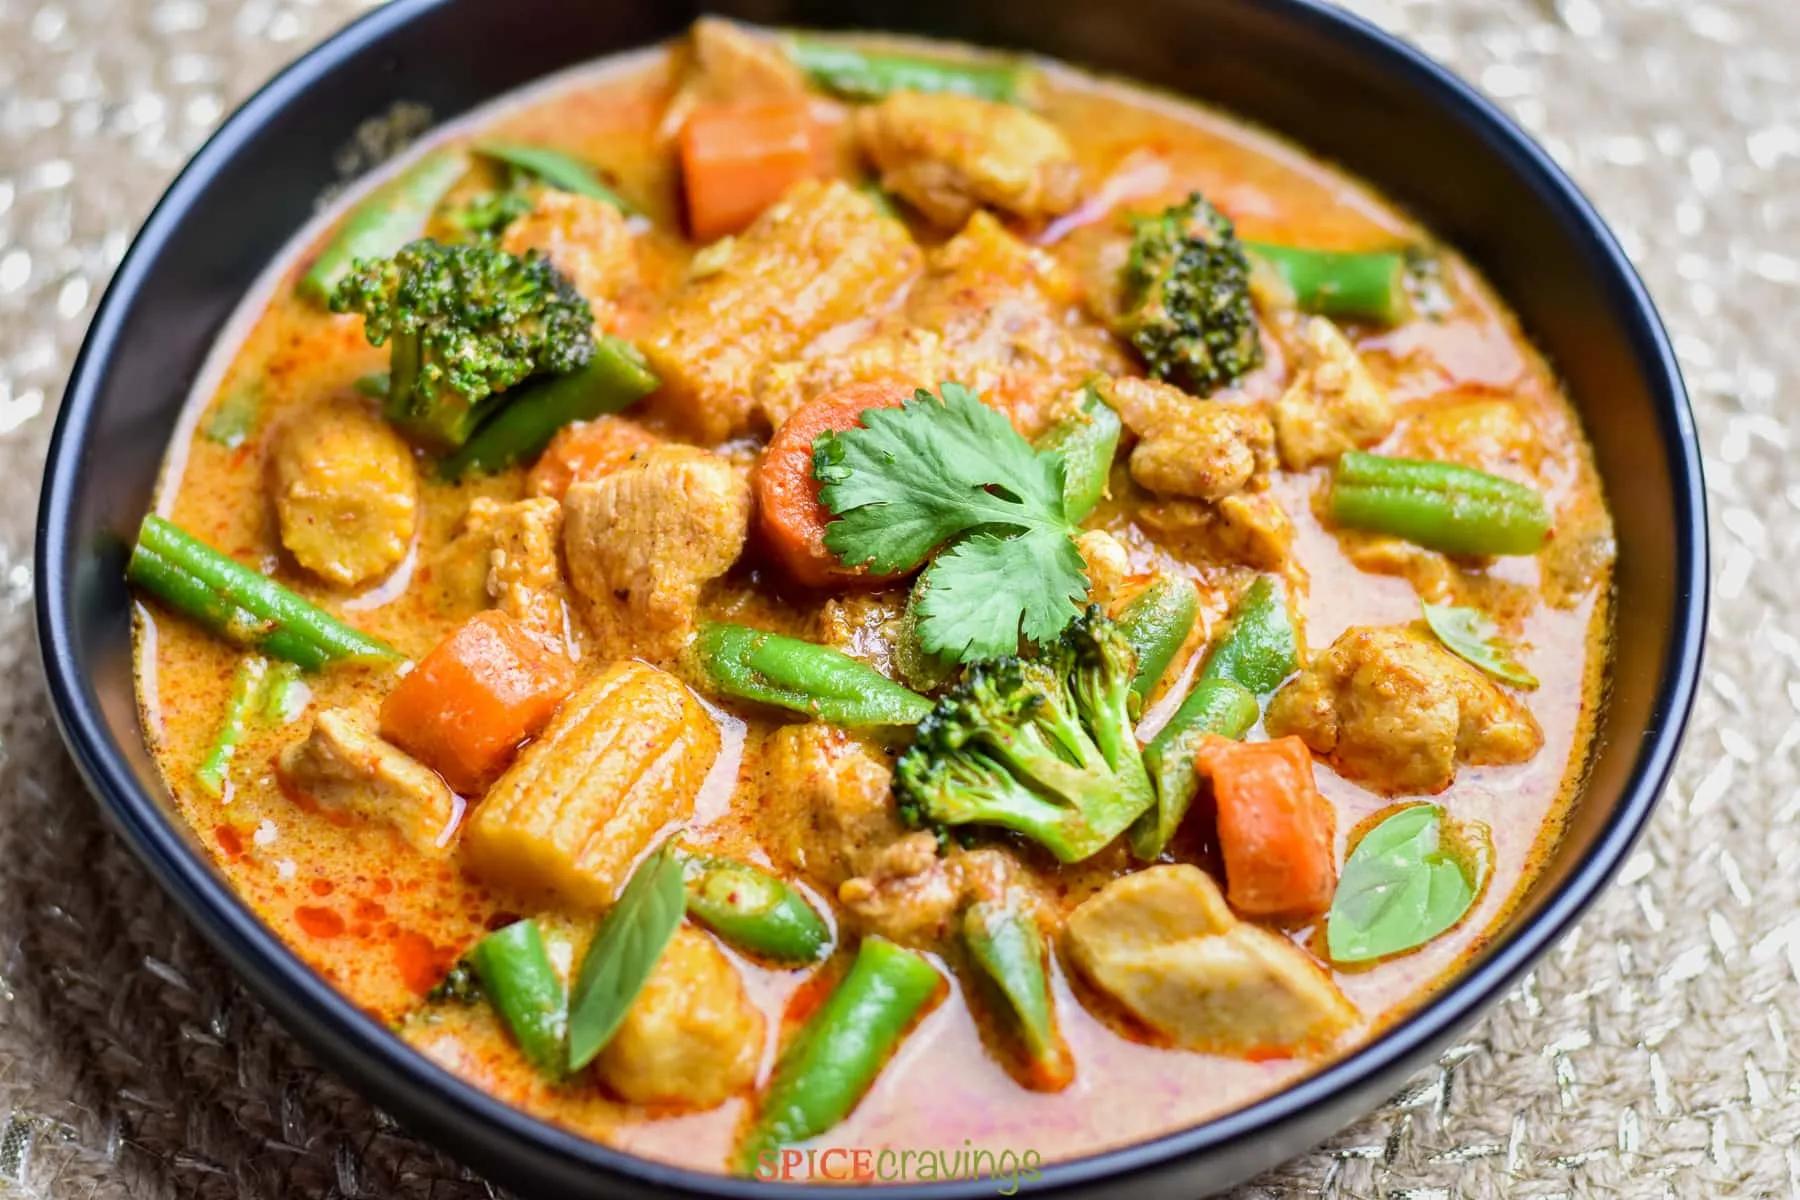 Thai Massaman Curry in Instant Pot or Stovetop - Spice Cravings